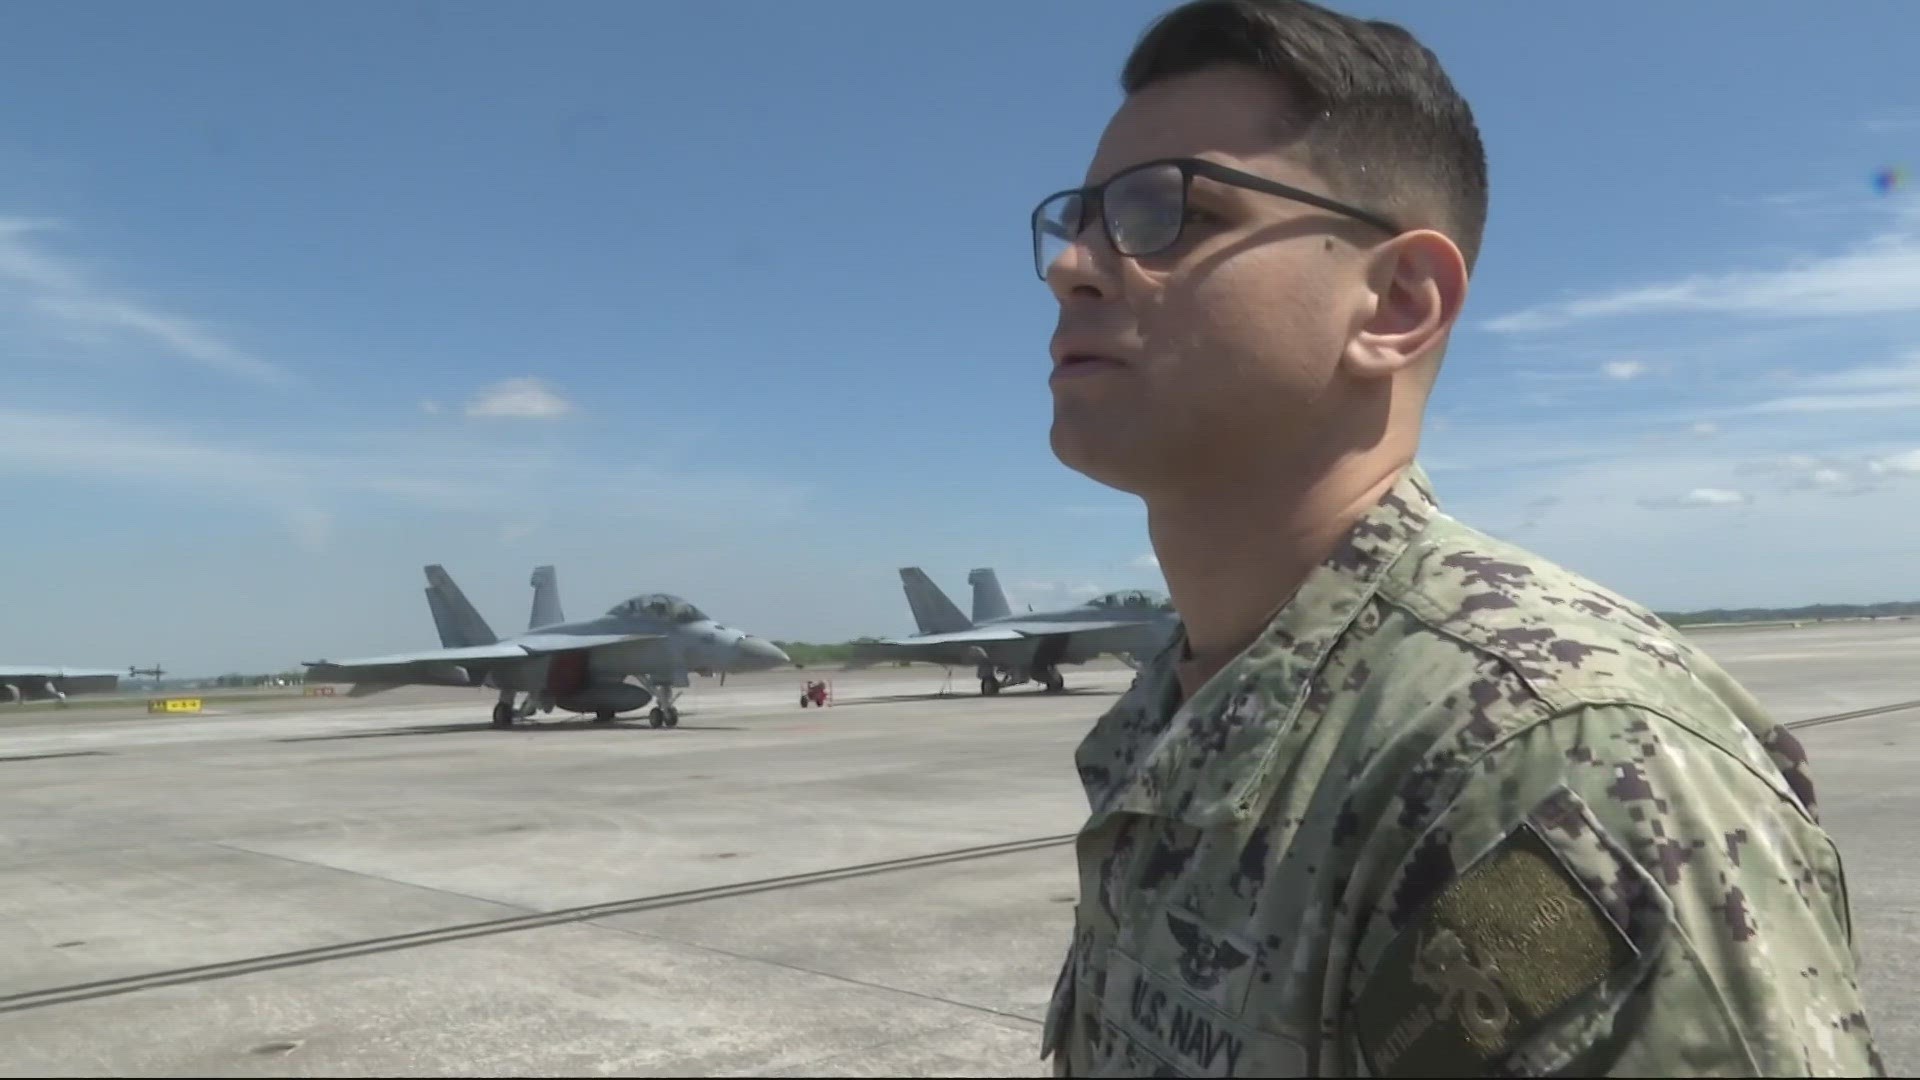 Rodrigues was named NAS JAX Sailor of the Year and has served in the Navy for 6 years.